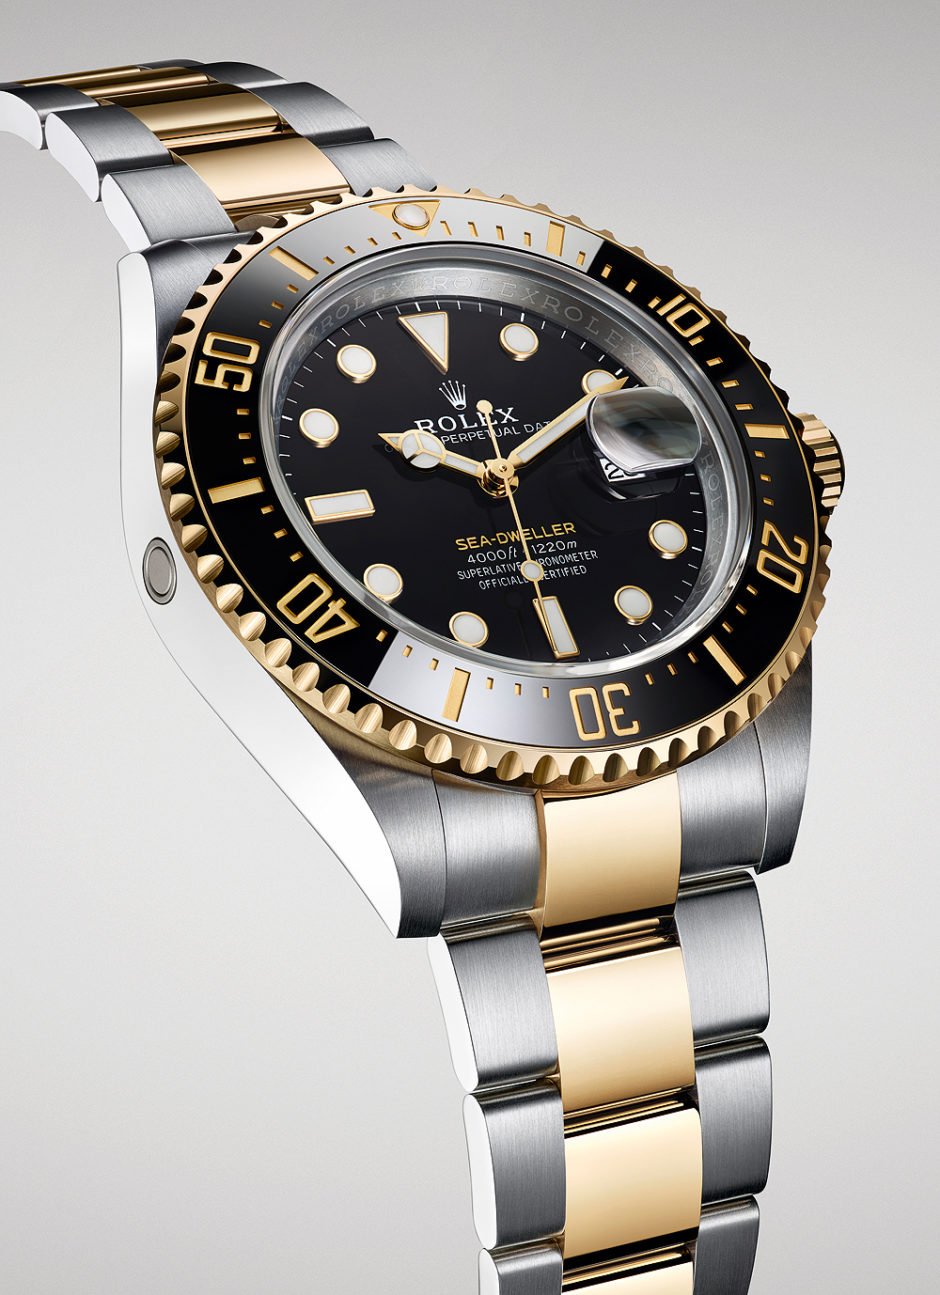 Sunken Treasure: Rolex Adds Gold to the Sea-Dweller | WatchTime - USA's ...